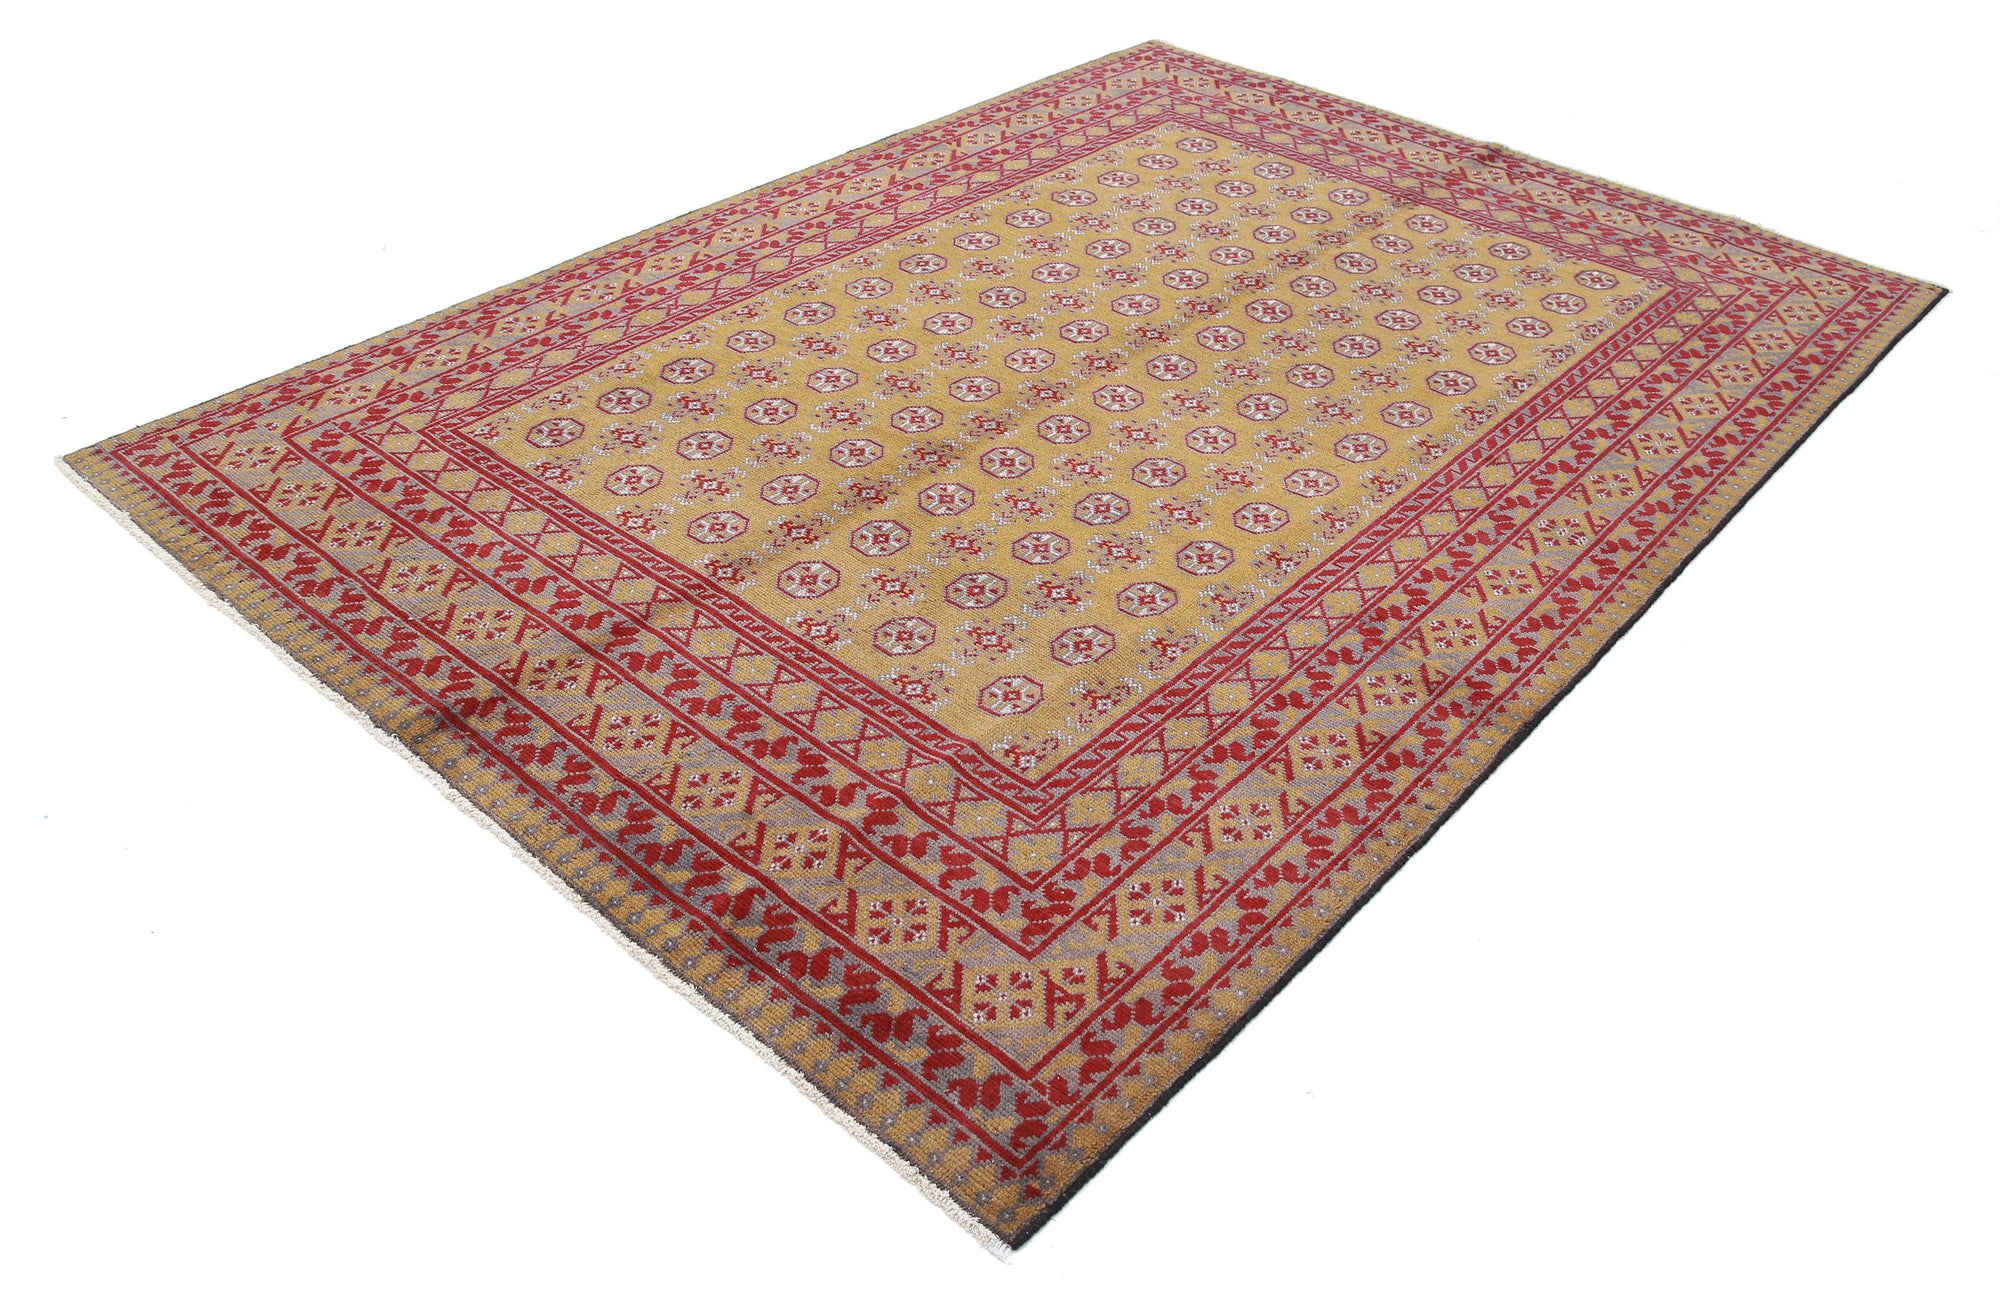 Revival-hand-knotted-gul-collection-wool-rug-5013974-2.jpg